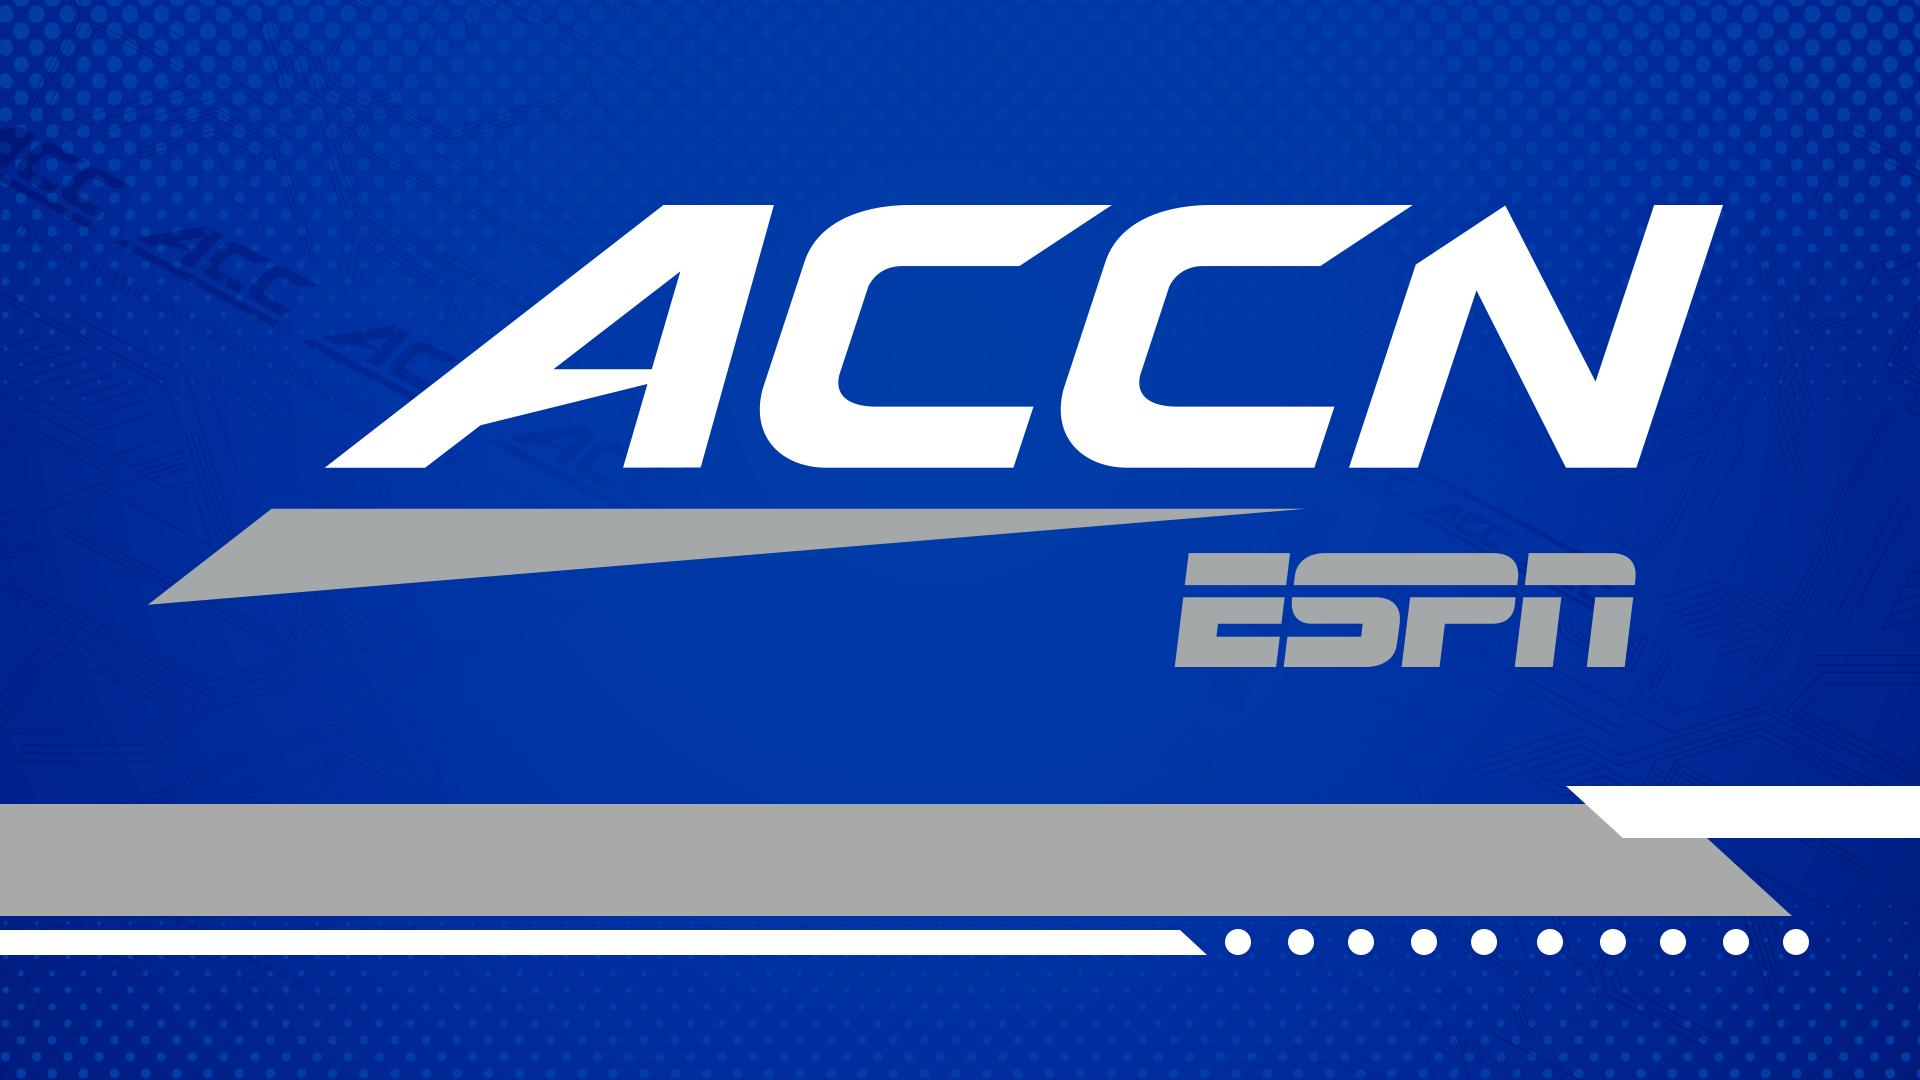 How to Watch The ACC Network on Roku, Fire TV, Apple TV, & More